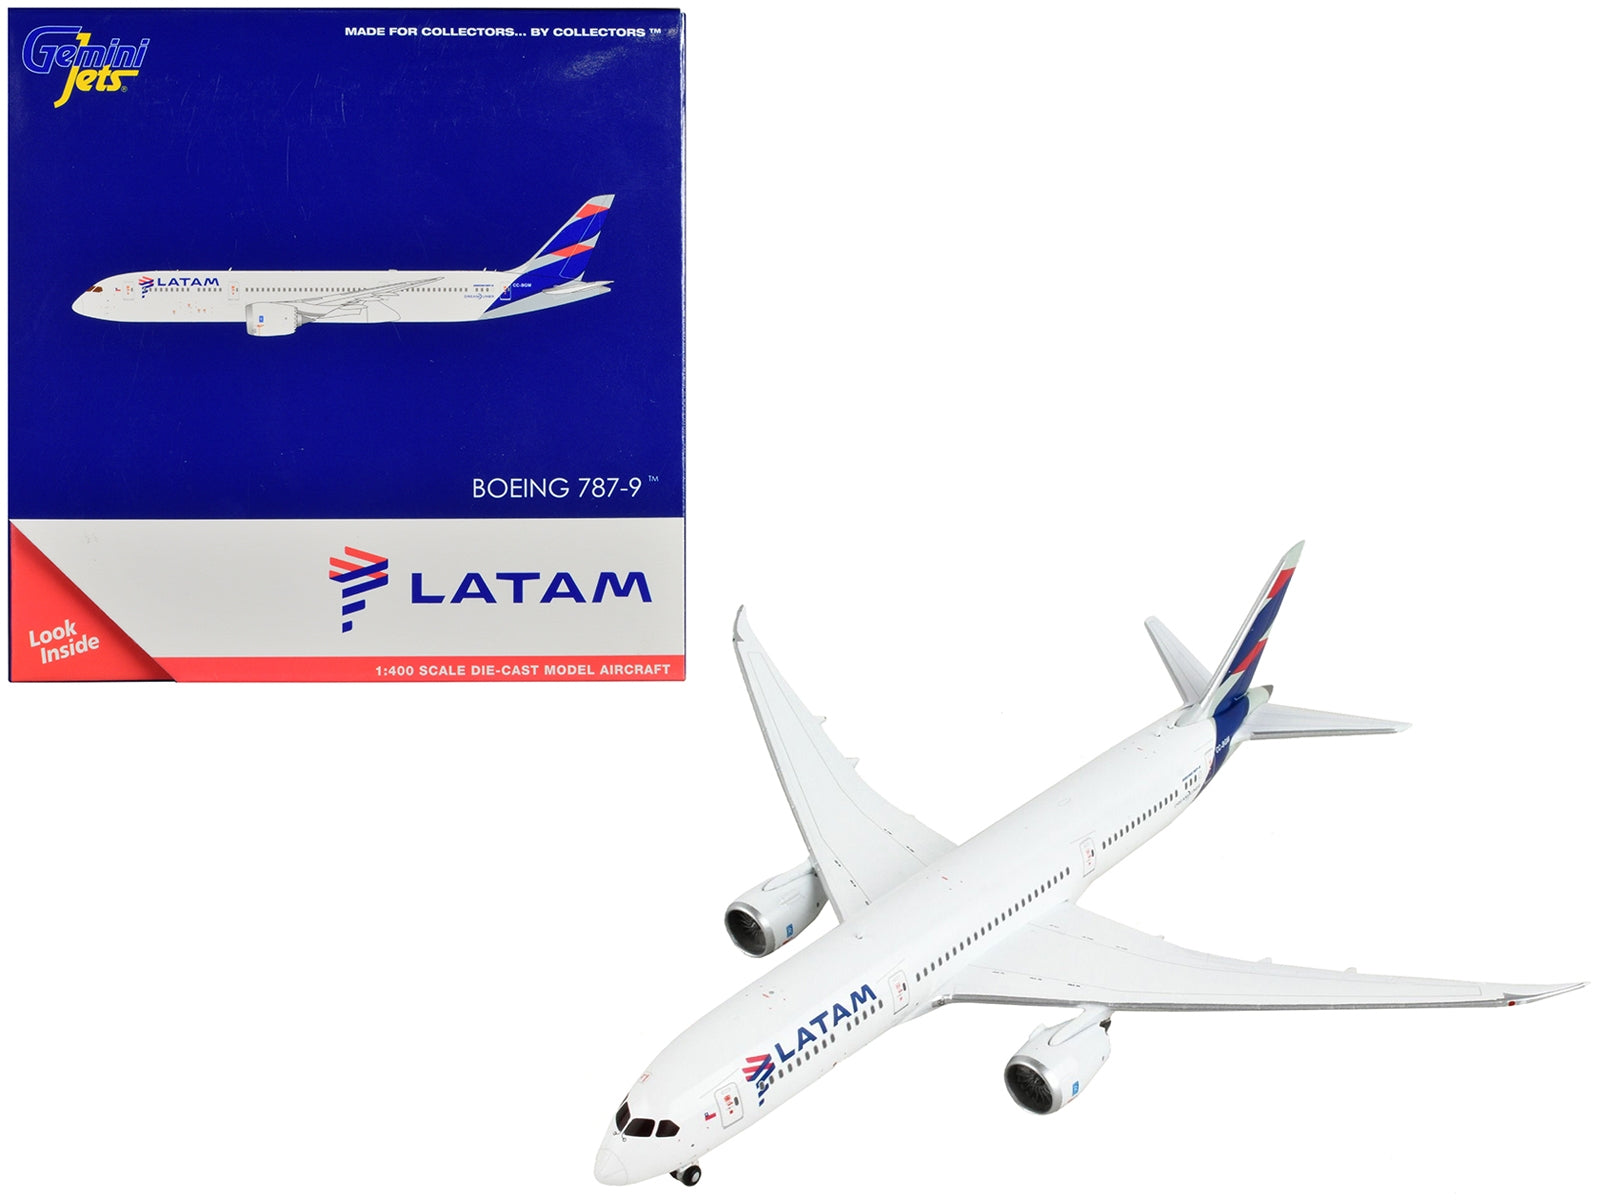 Boeing 787-9 Commercial Aircraft "LATAM Airlines" White with Blue Tail 1/400 Diecast Model Airplane by GeminiJets GeminiJets